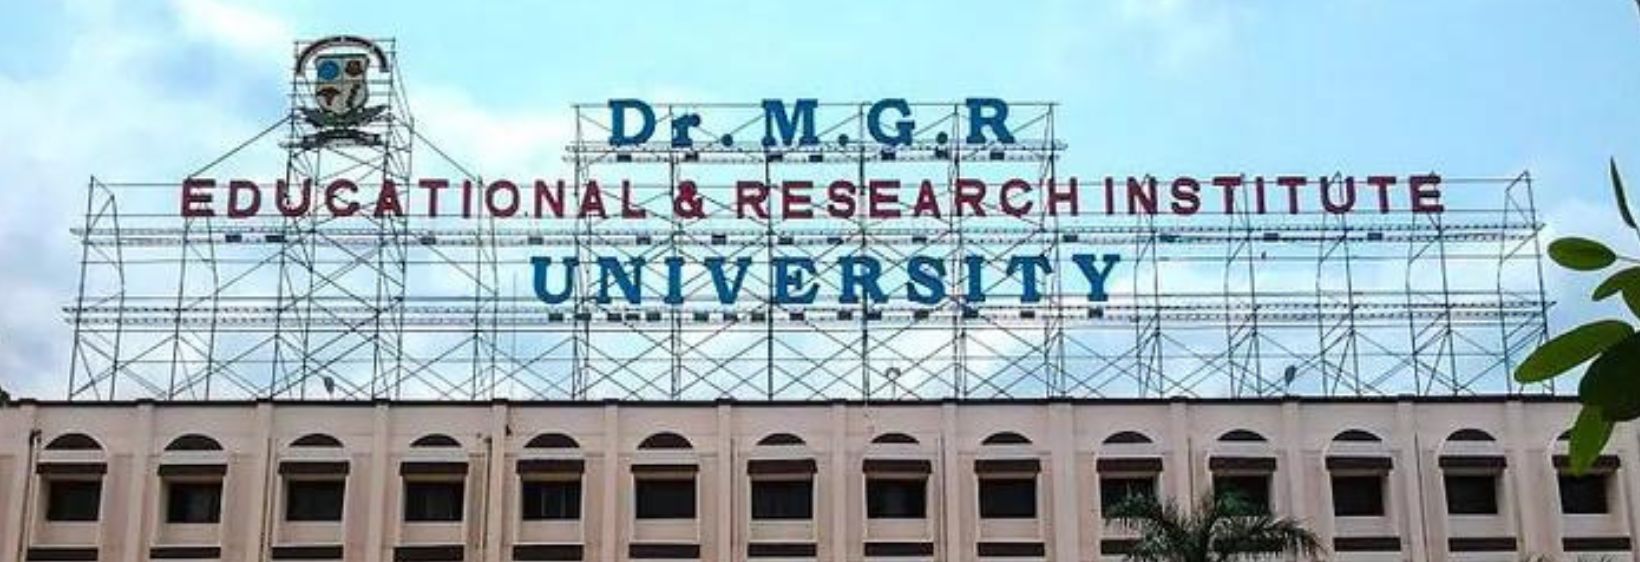 College of Nursing, Dr.M.G.R.Educational and Research Institute - Chennai